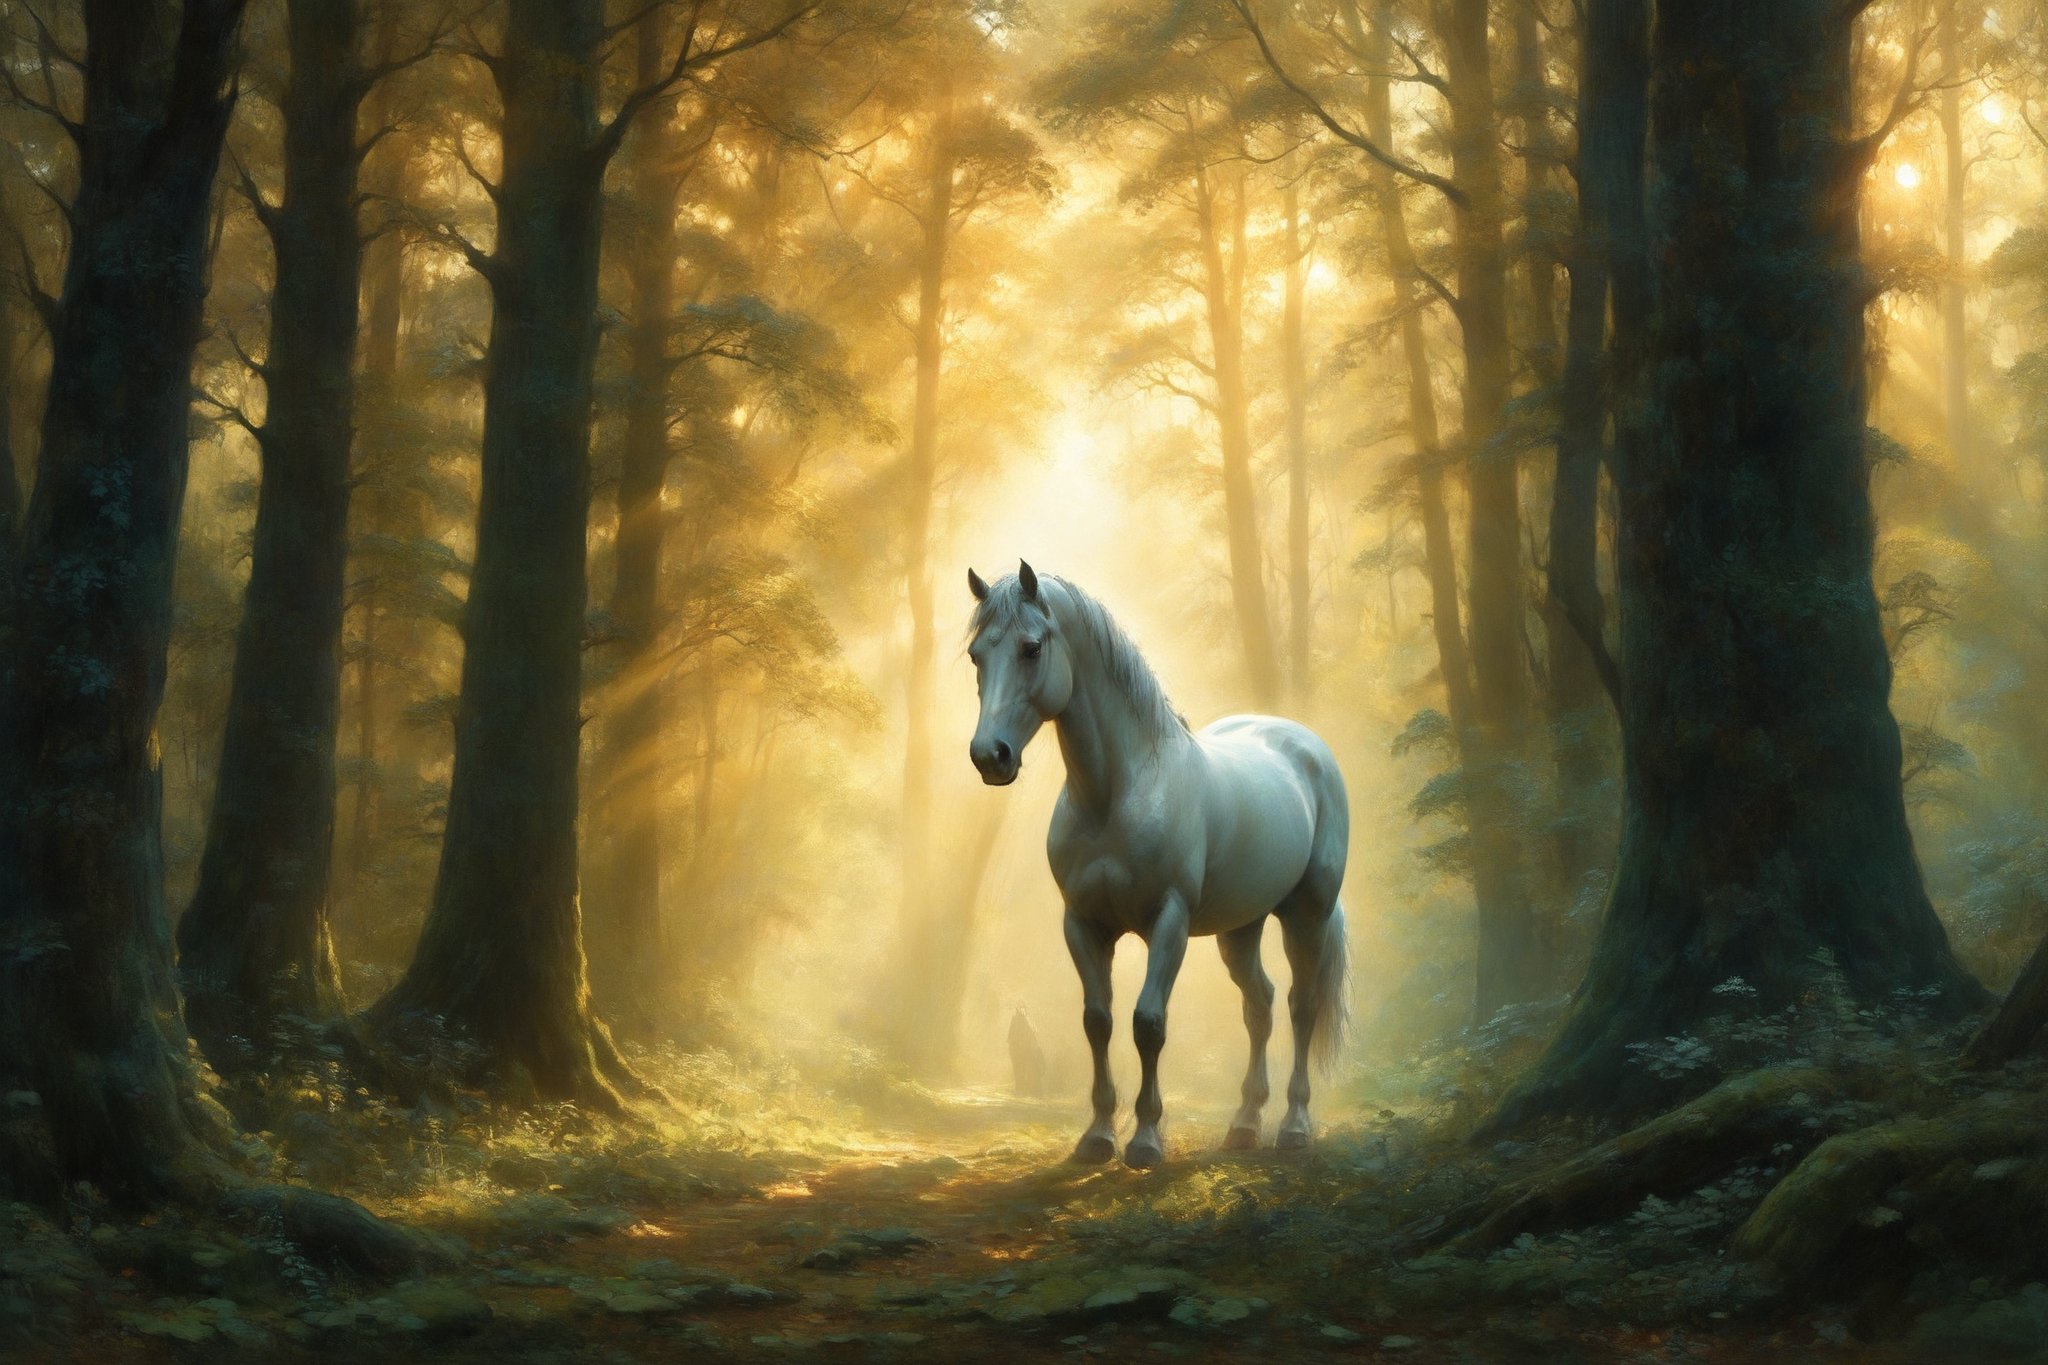 Sleipnir, the mythical eight-legged horse, standing majestically in an enchanting, sunlit magical forest. The forest is lush and vibrant, with towering trees whose leaves shimmer in various shades of green and gold. Beams of sunlight pierce through the canopy, casting a warm, ethereal glow on the forest floor. Sleipnir's coat gleams with a silvery hue, each of its eight powerful legs poised gracefully. Its eyes, deep and intelligent, reflect the magic of the forest. Surrounding Sleipnir are delicate, sparkling particles of light, adding an air of mystery and enchantment to the scene. The atmosphere is serene and mystical, with a sense of ancient power and beauty enveloping the majestic creature.